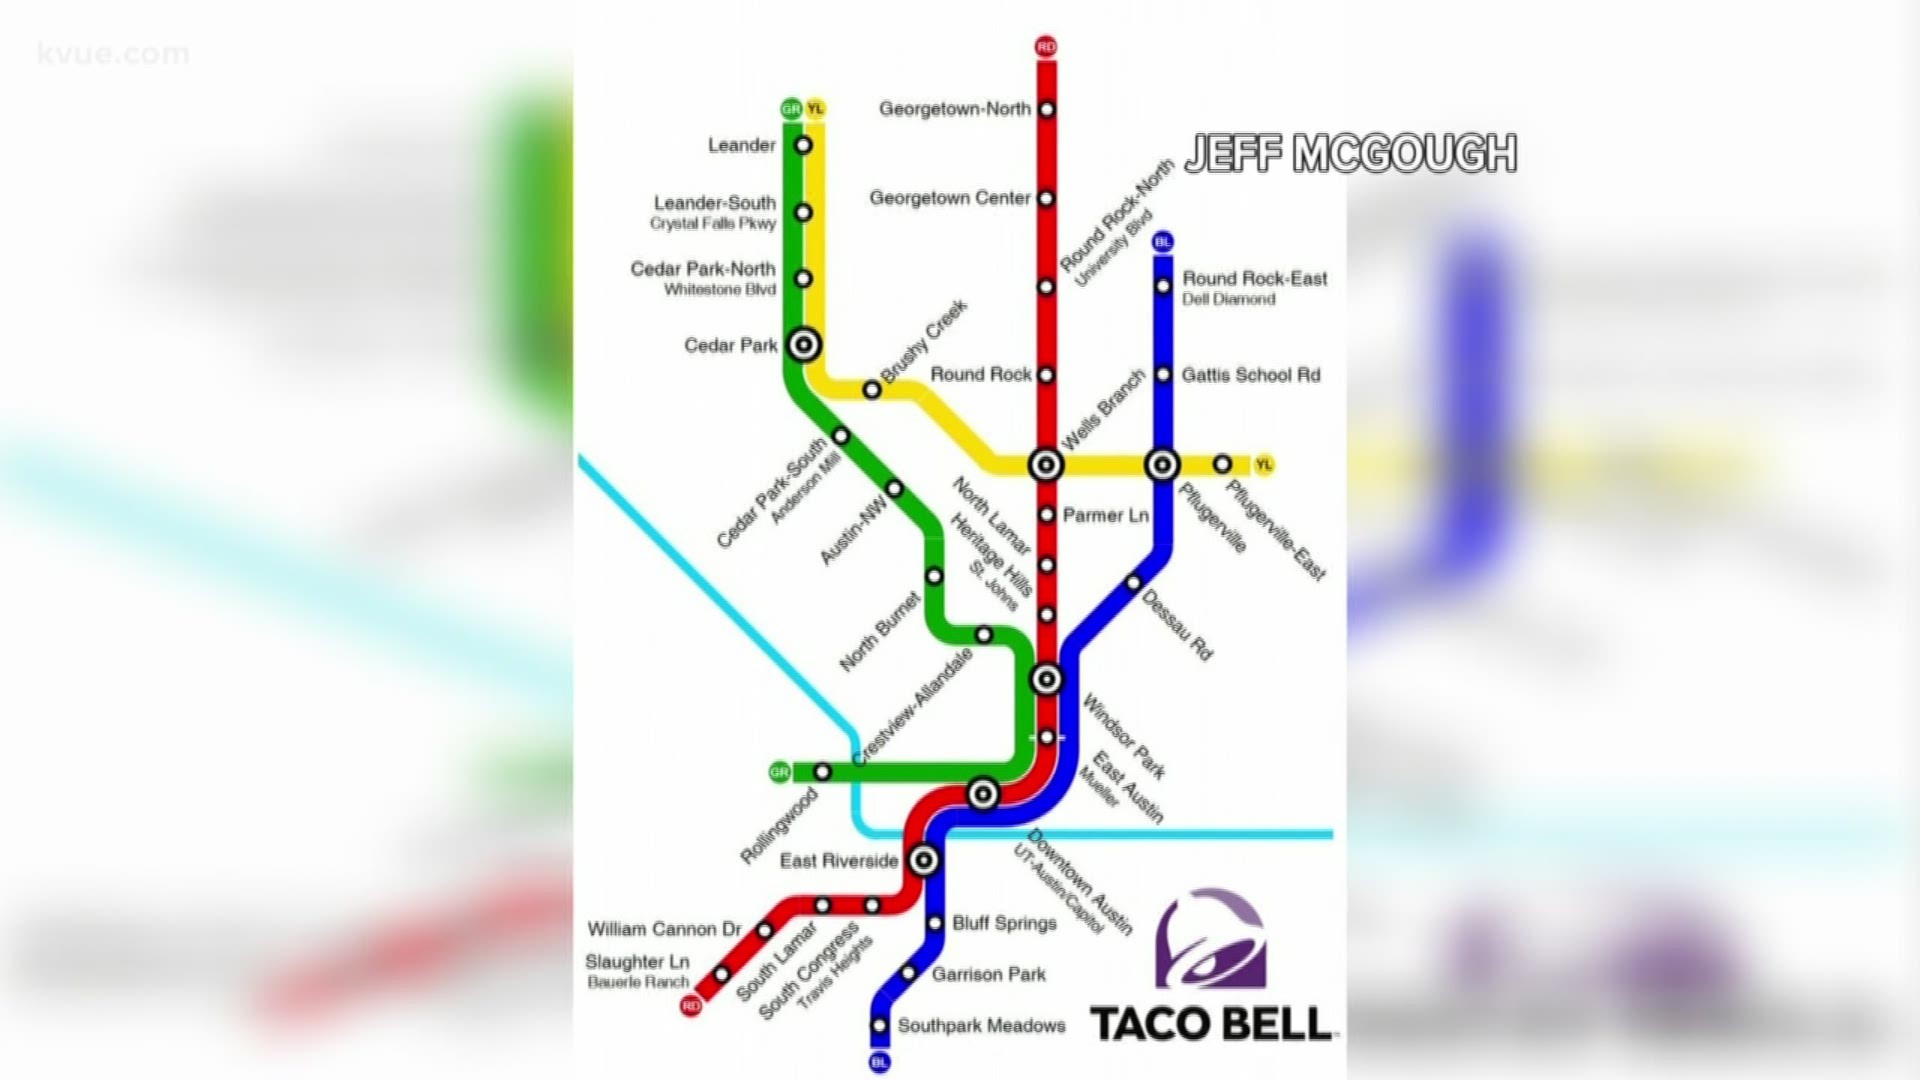 Picture your perfect public transit line for Central Texas ... does it take you to every Taco Bell in the area?